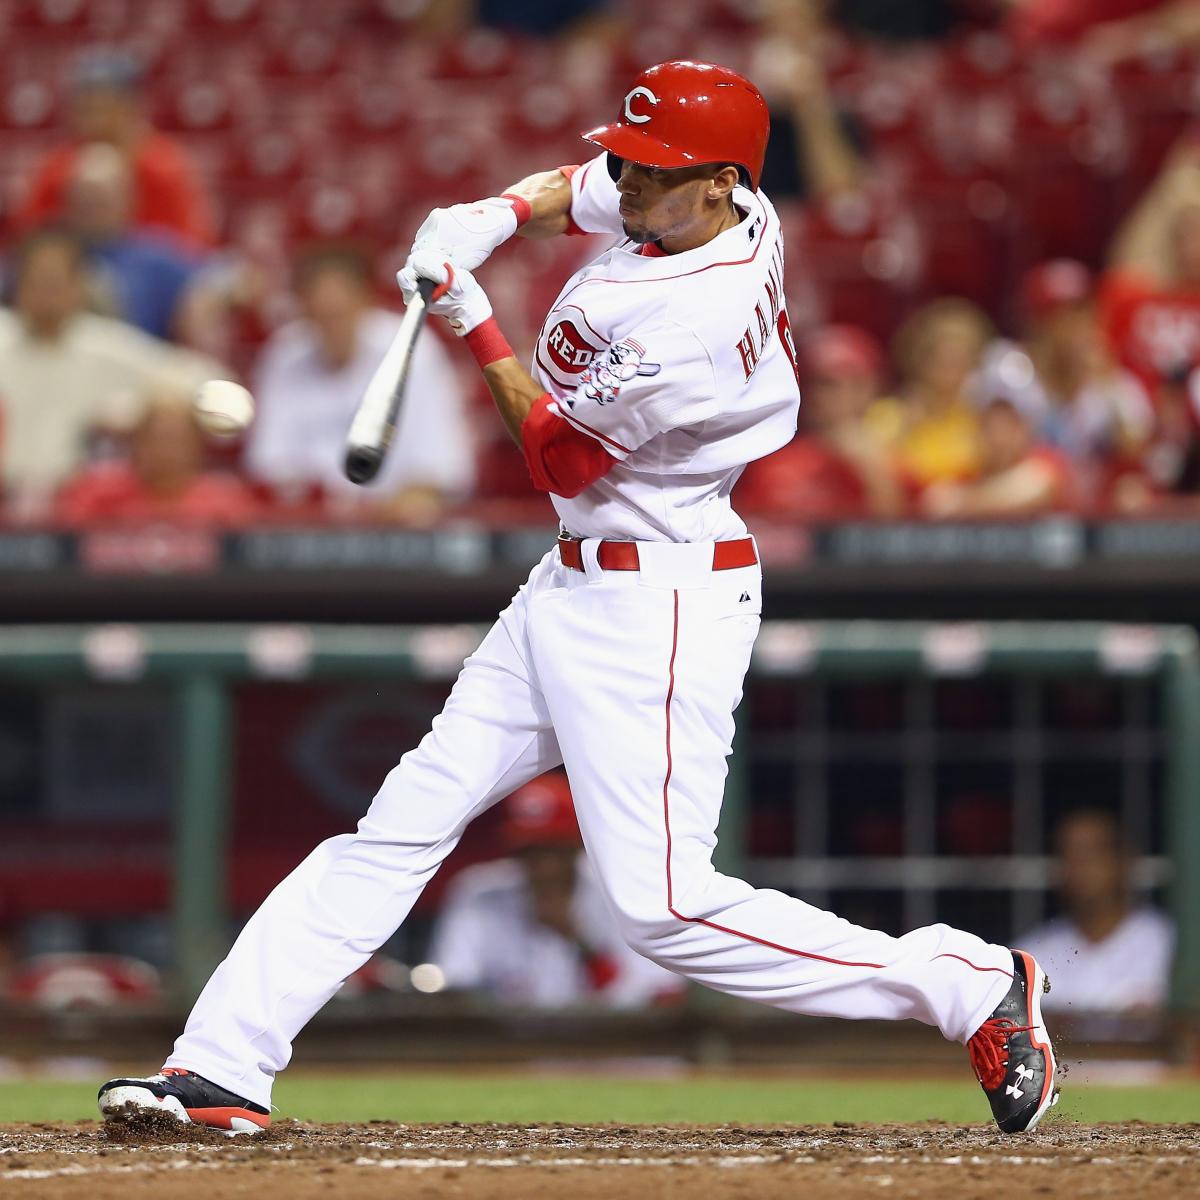 Billy Hamilton: Email says Reds outfielder will meet boy with jersey